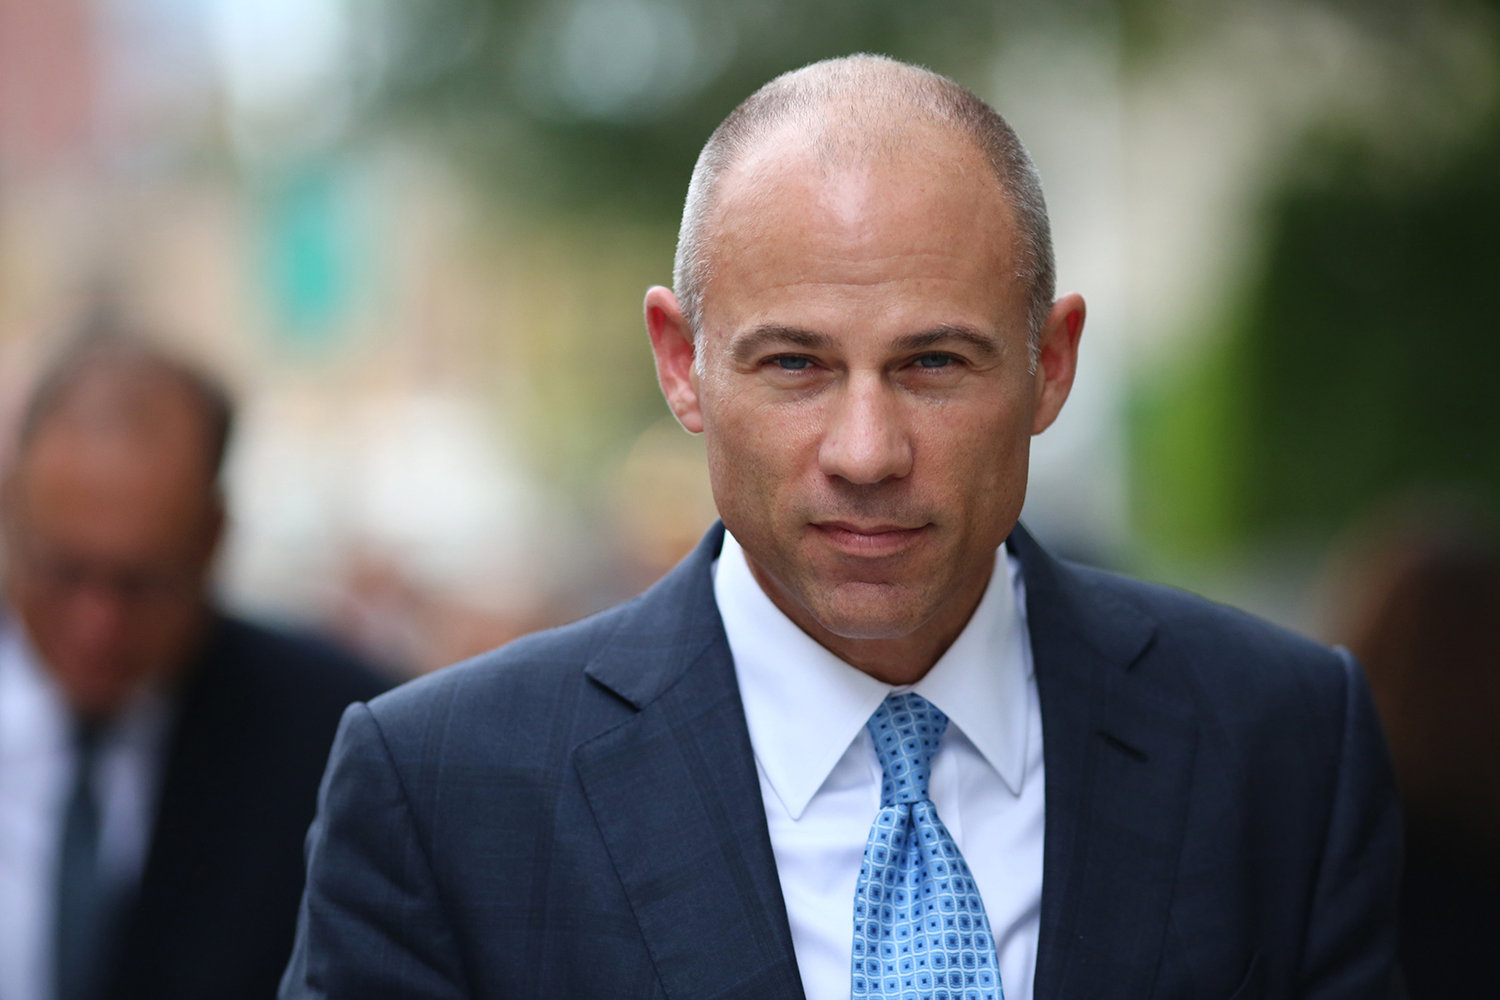 Michael Avenatti is seen outside the Daniel Patrick Moynihan federal courthouse on Oct. 8, 2019, in New York. (Alec Tabak/New York Daily News/TNS)